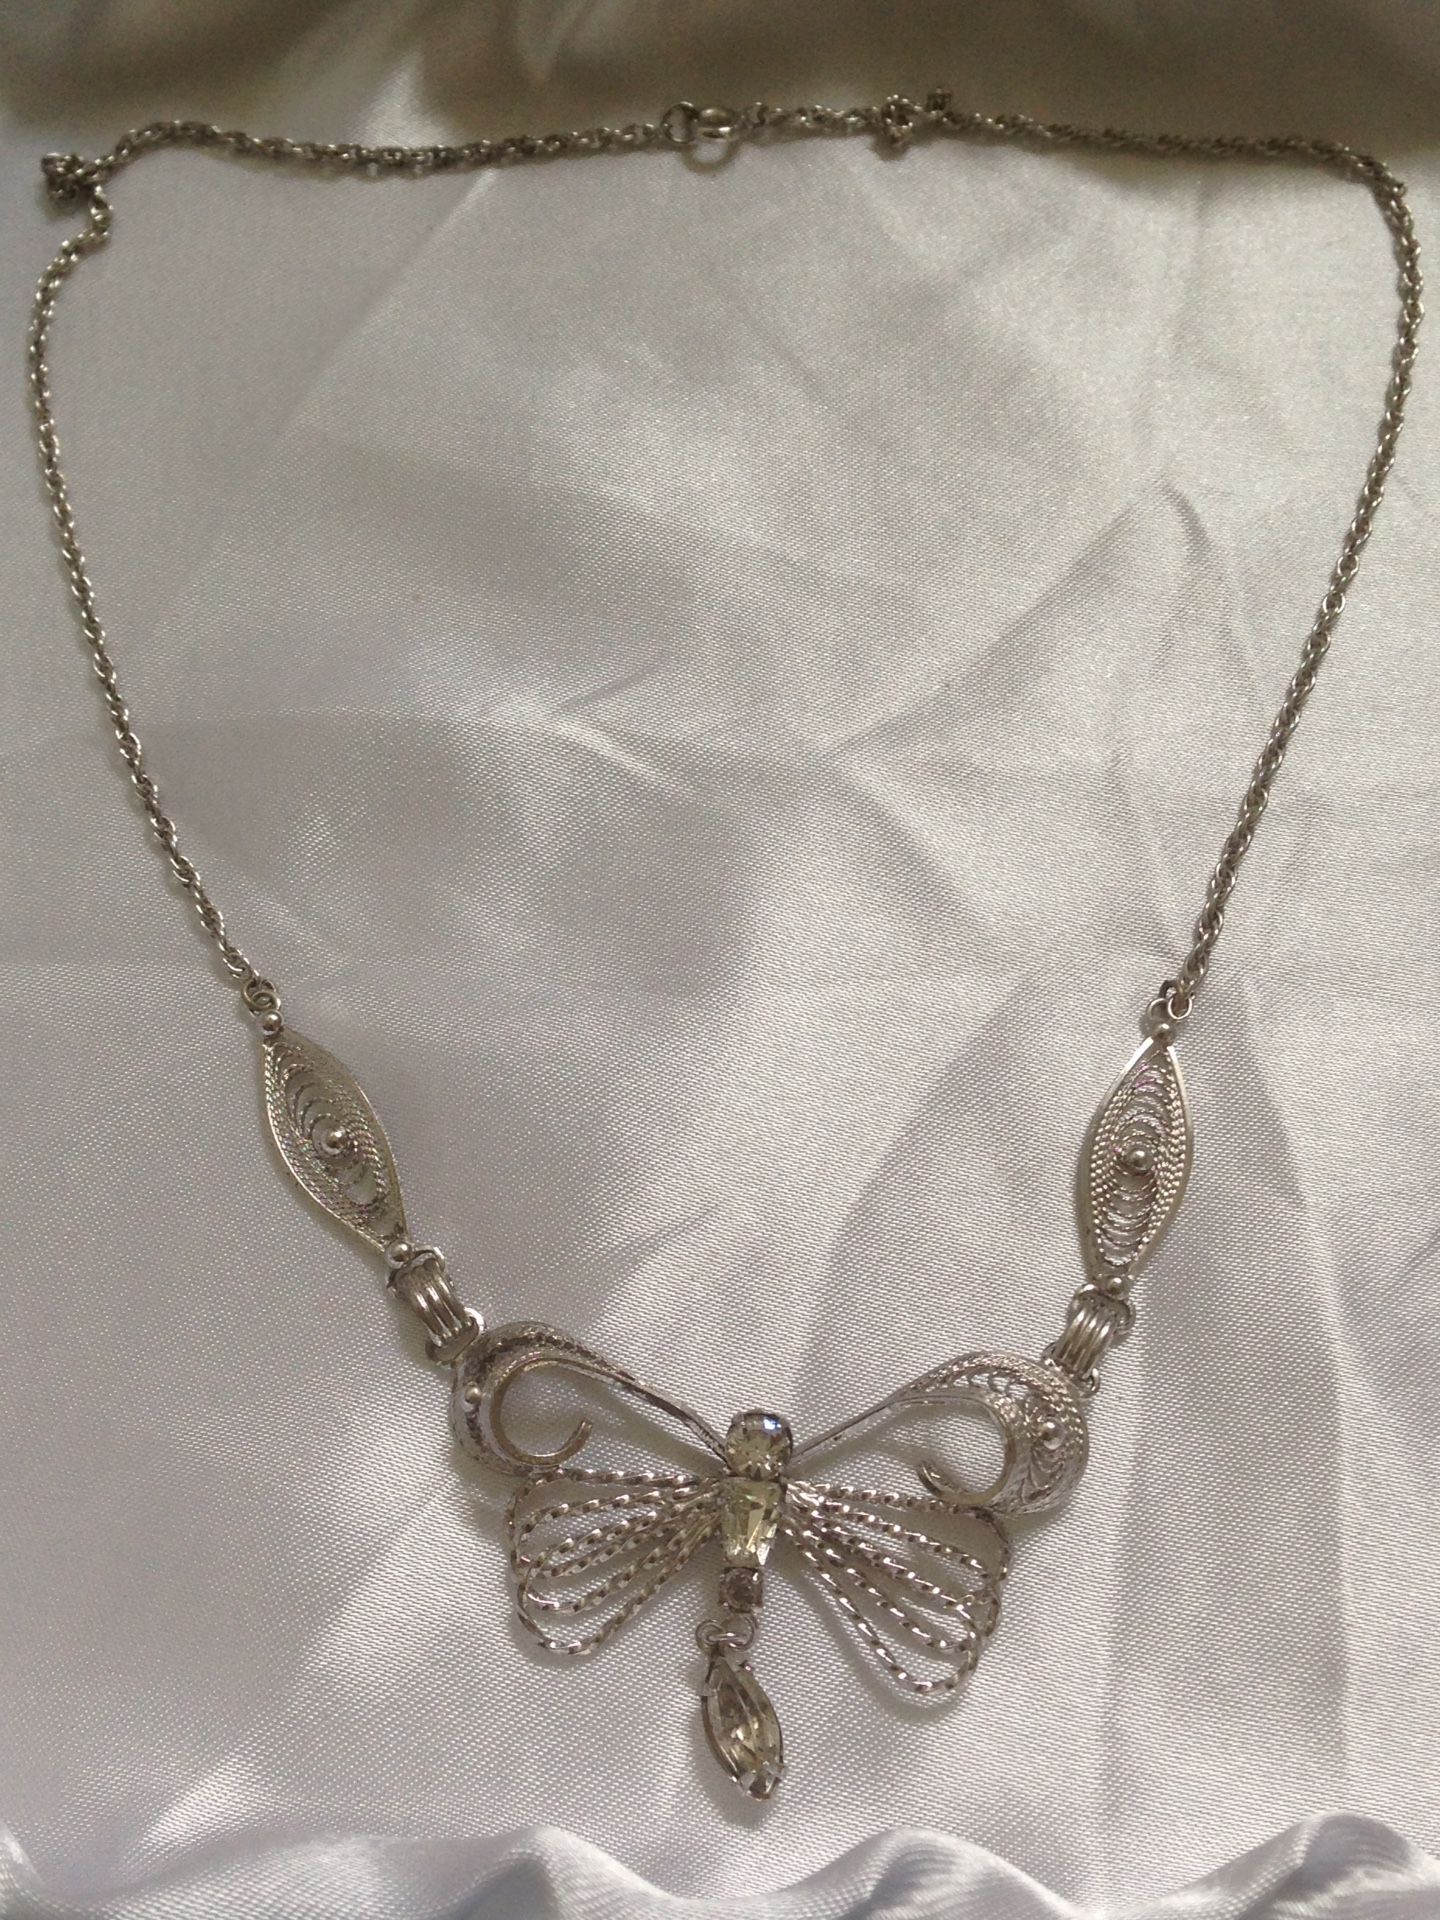 Butterfly Necklace Sterling Silver with beautiful yellow sapphire stones -10" long .